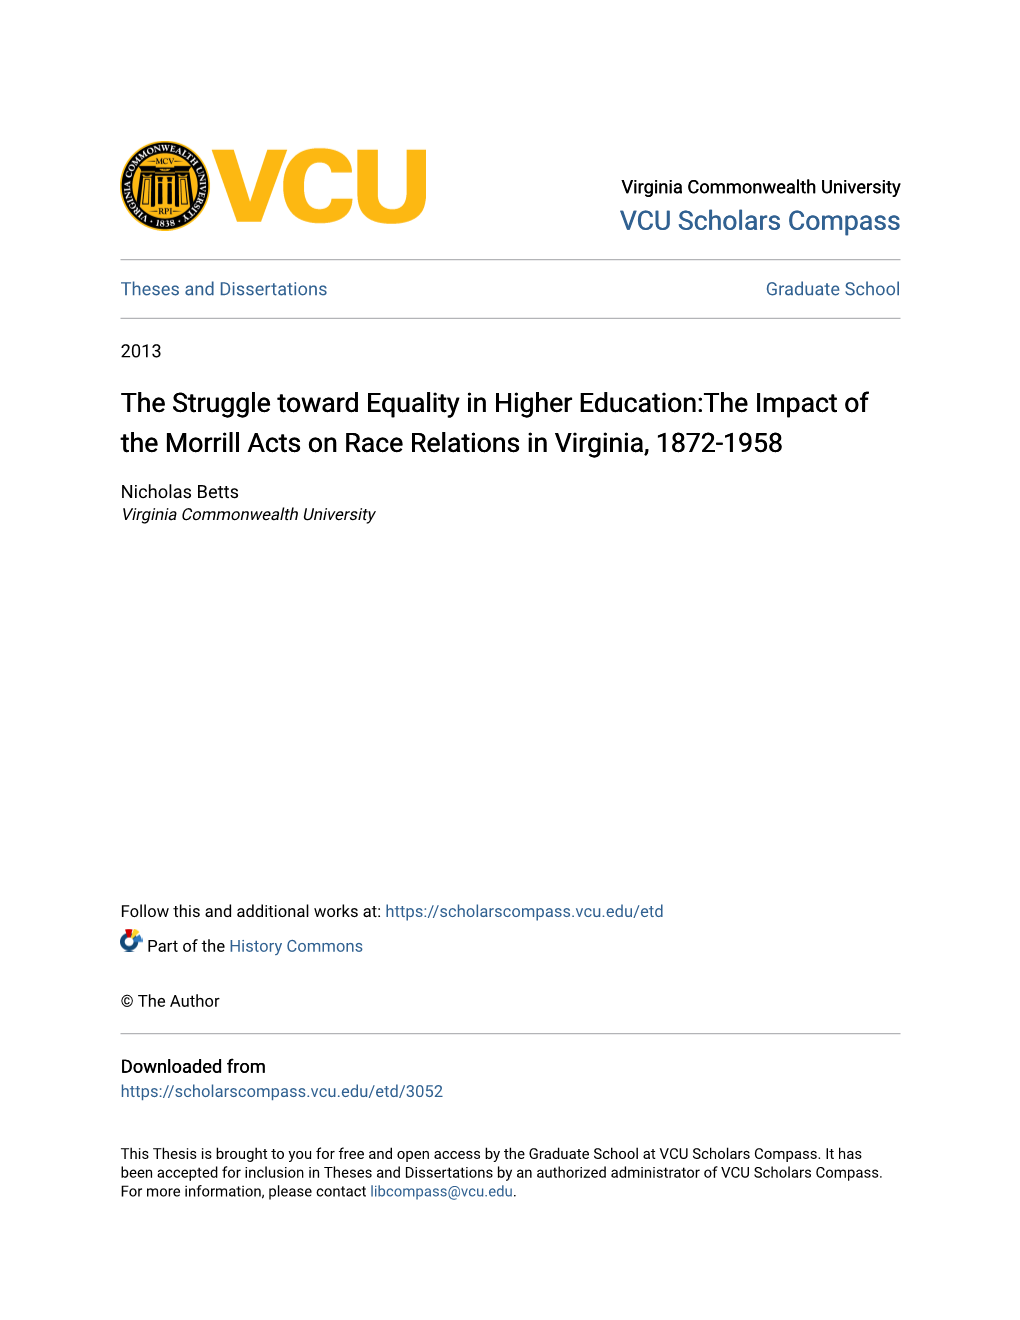 The Struggle Toward Equality in Higher Education:The Impact of the Morrill Acts on Race Relations in Virginia, 1872-1958